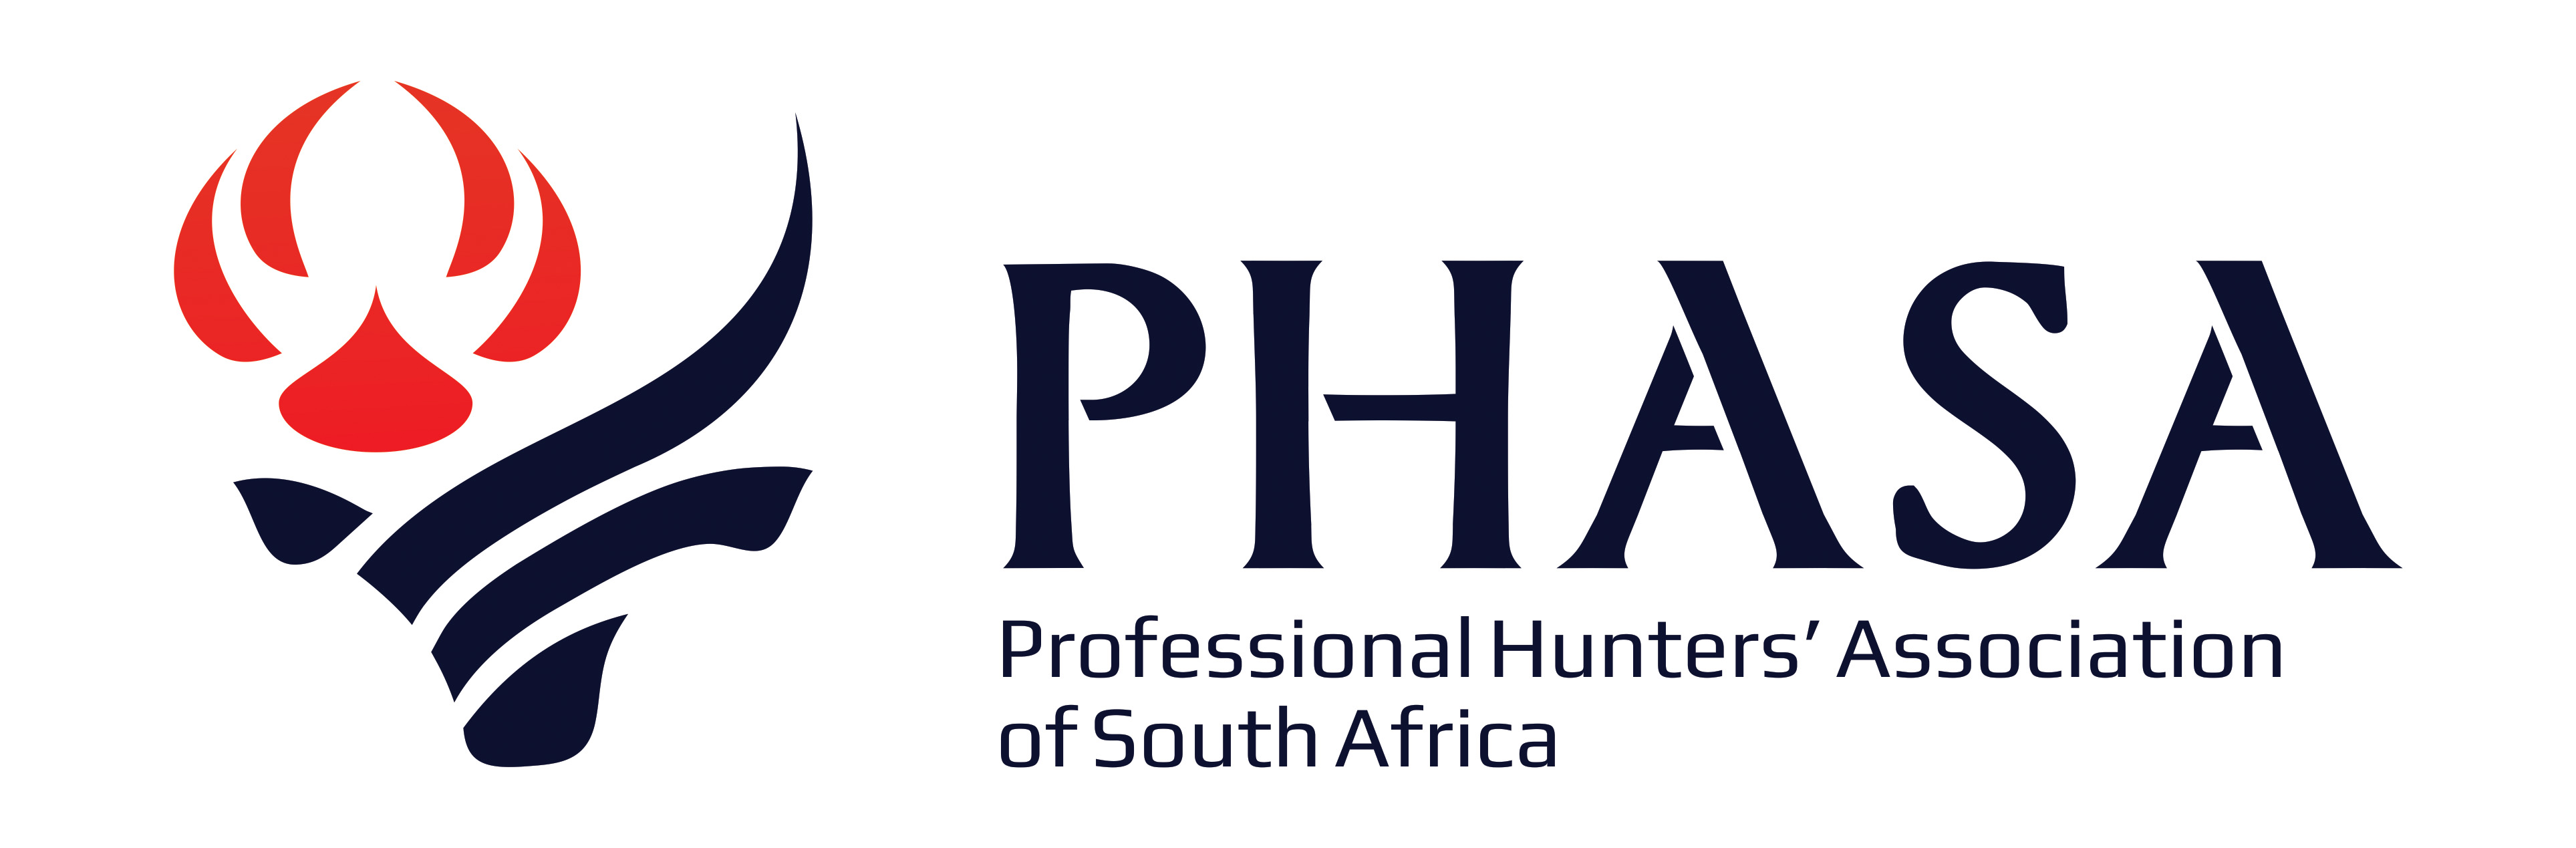 Professional Hunters Association South Africa, PHASA